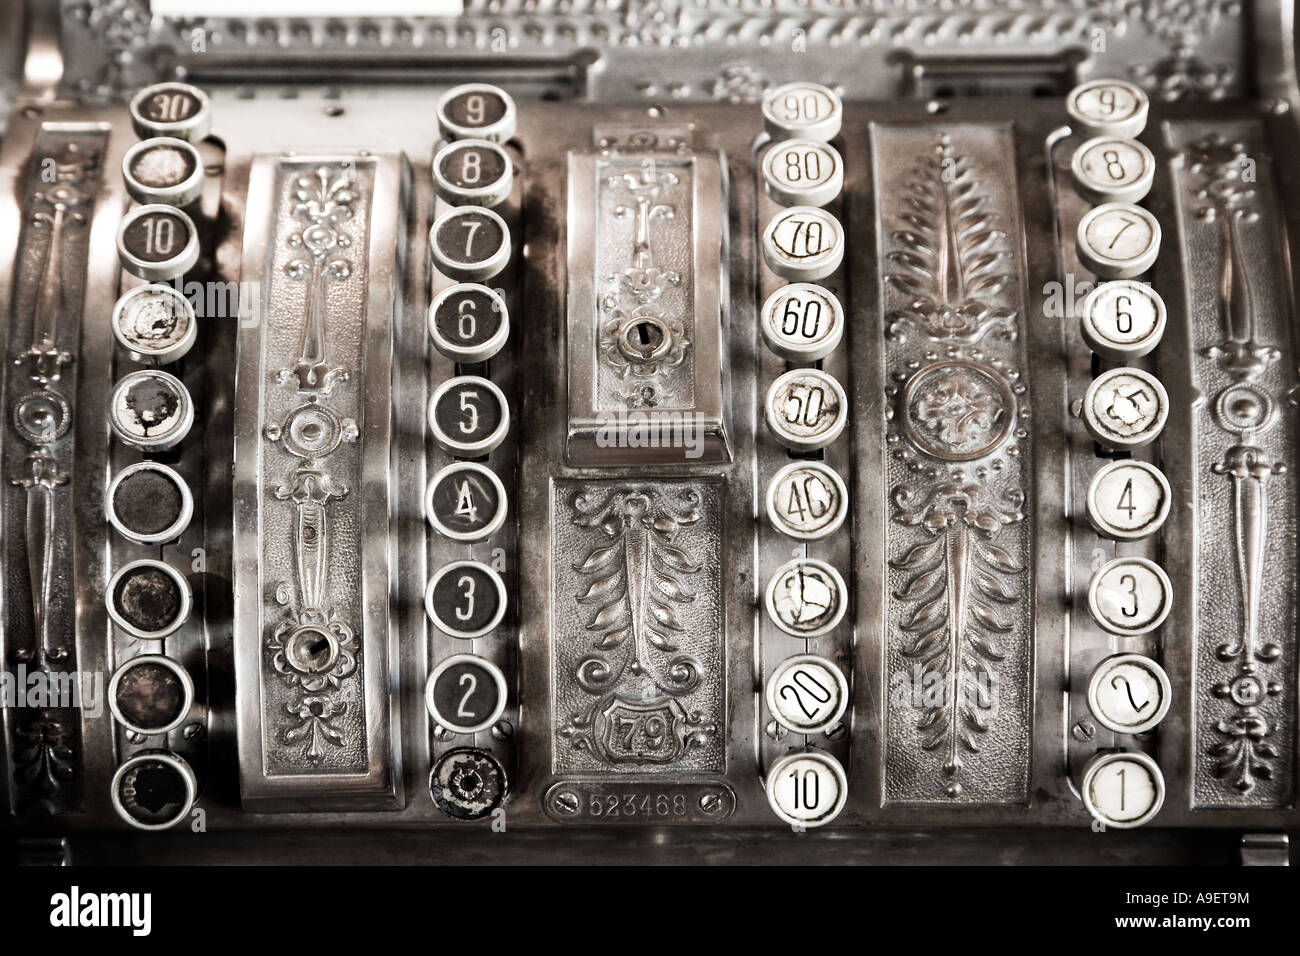 Keyboard on an old cash register Stock Photo